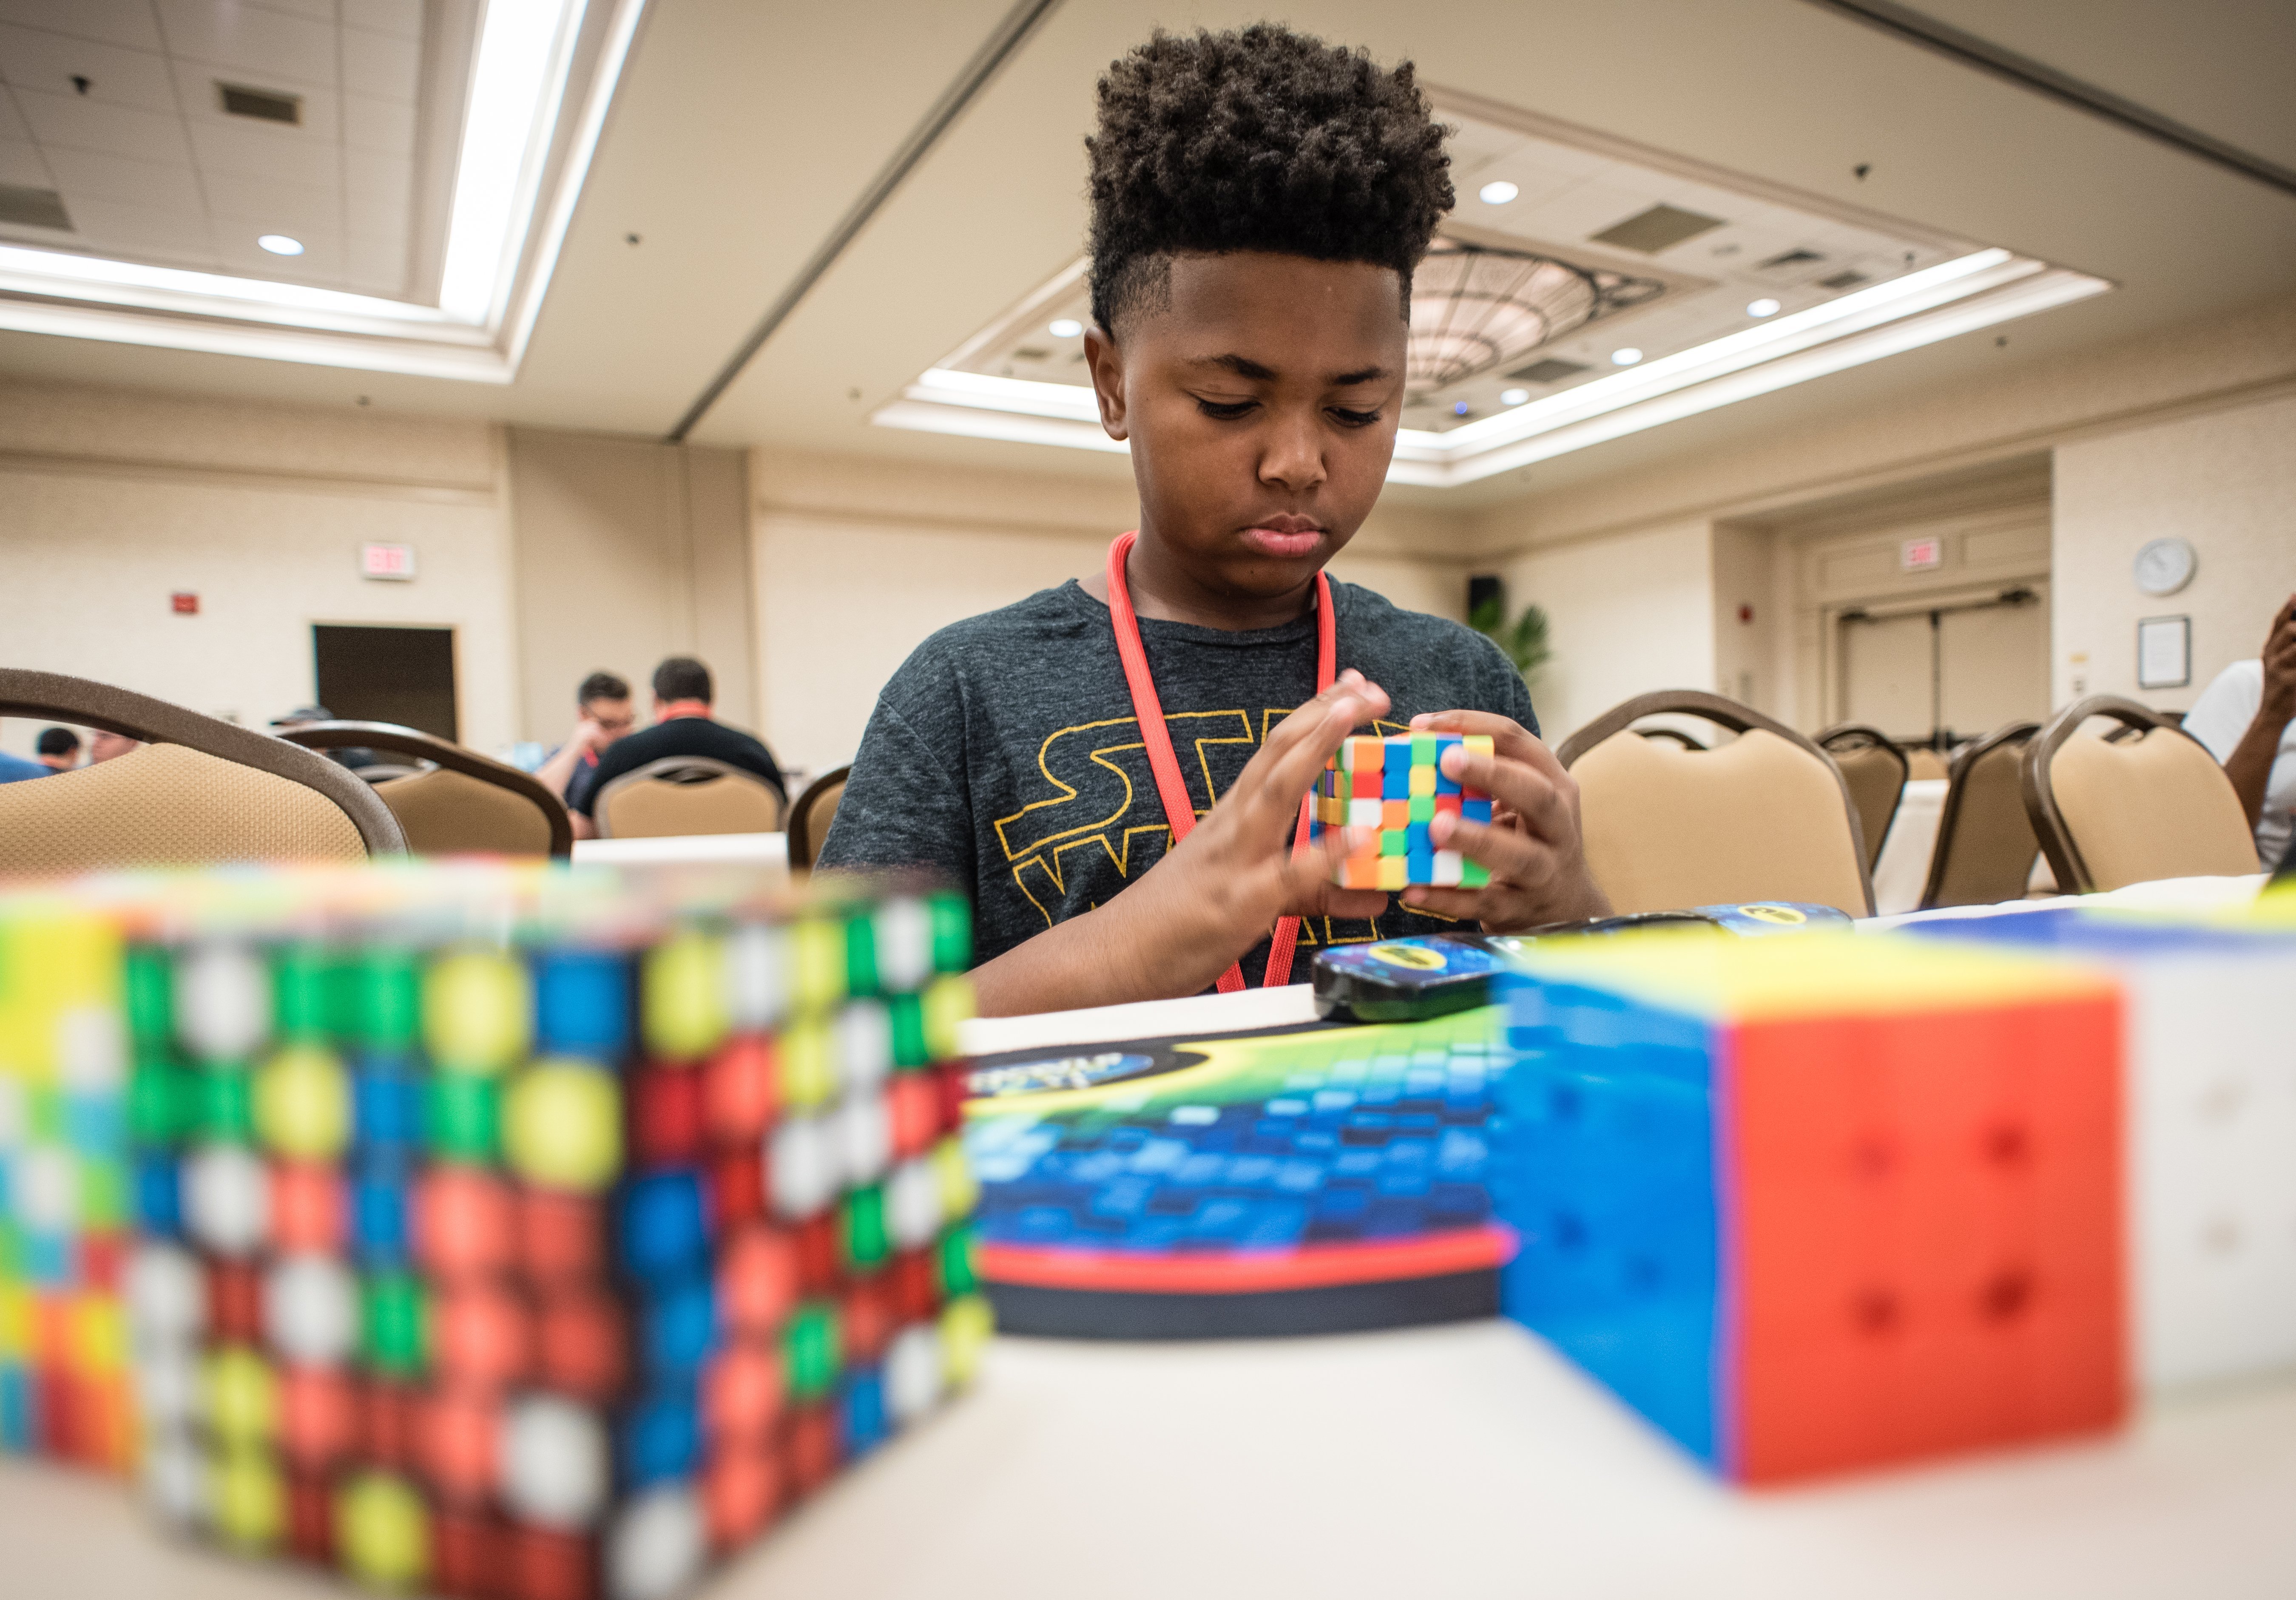  Stone Simpson, 11, from DC, came to demonstrate and teach people how to solve Rubik's Cubes and other twisty puzzles.|Photo: Getty Images